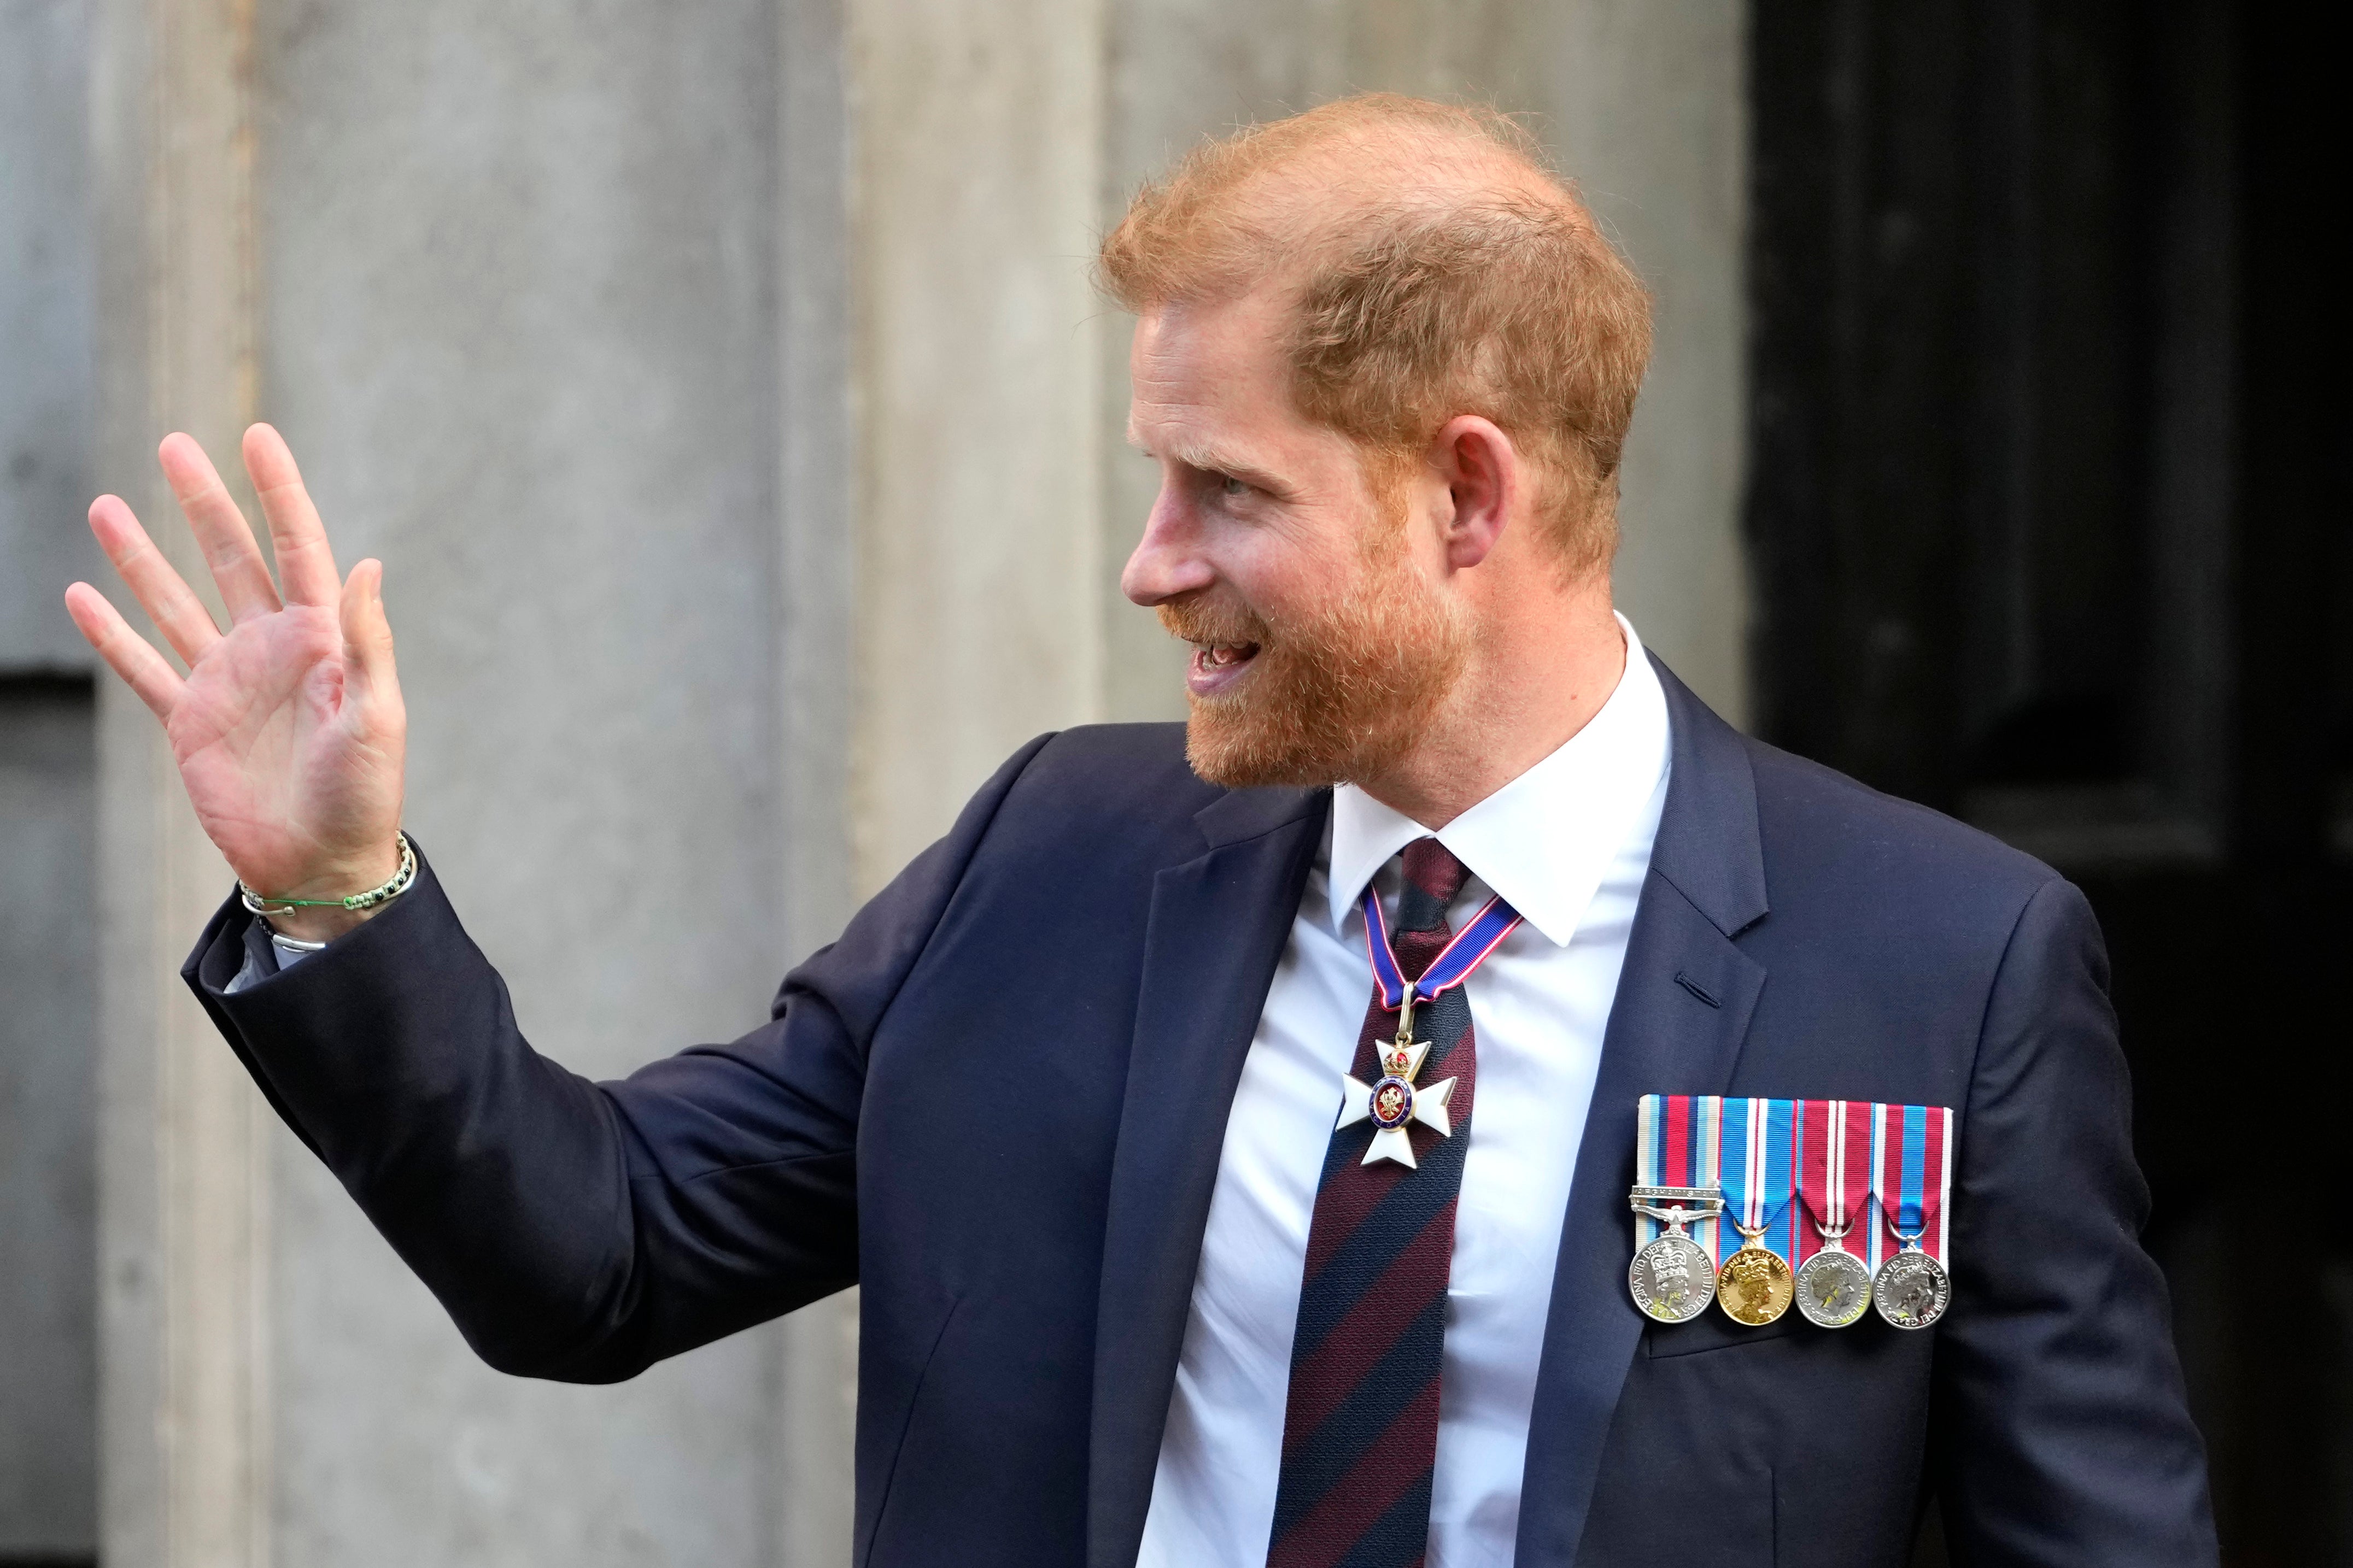 Prince Harry has not seen the king since learning of his cancer diagnosis in February.